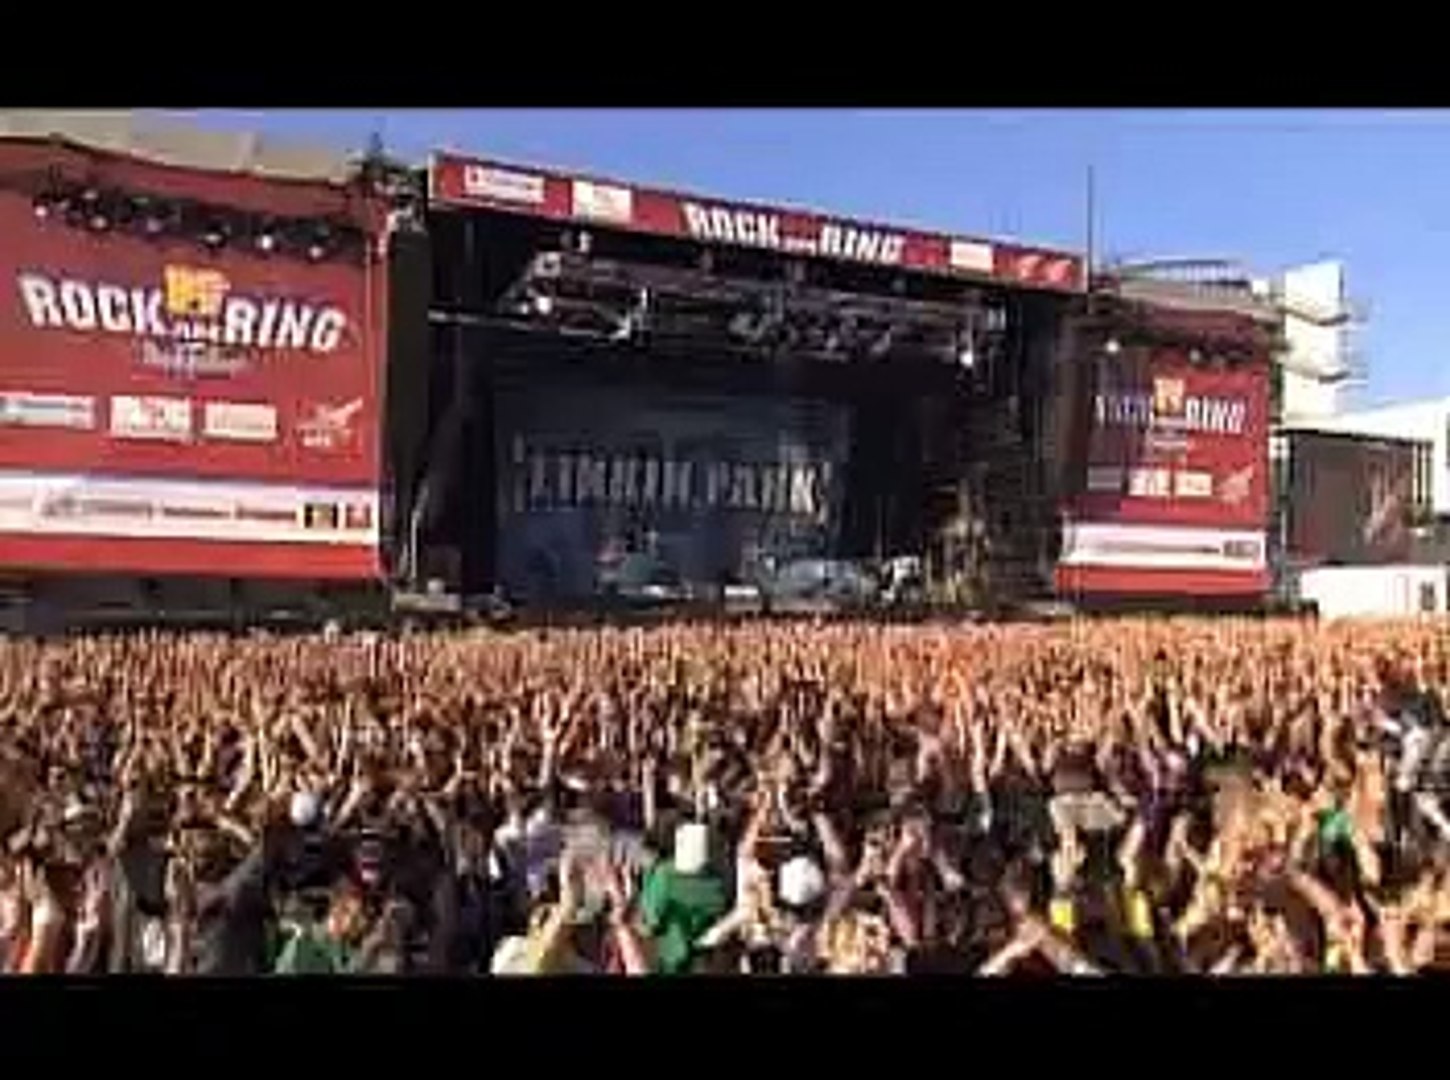 Linkin Park - With You Live At Rock AM Ring 2004 - video Dailymotion